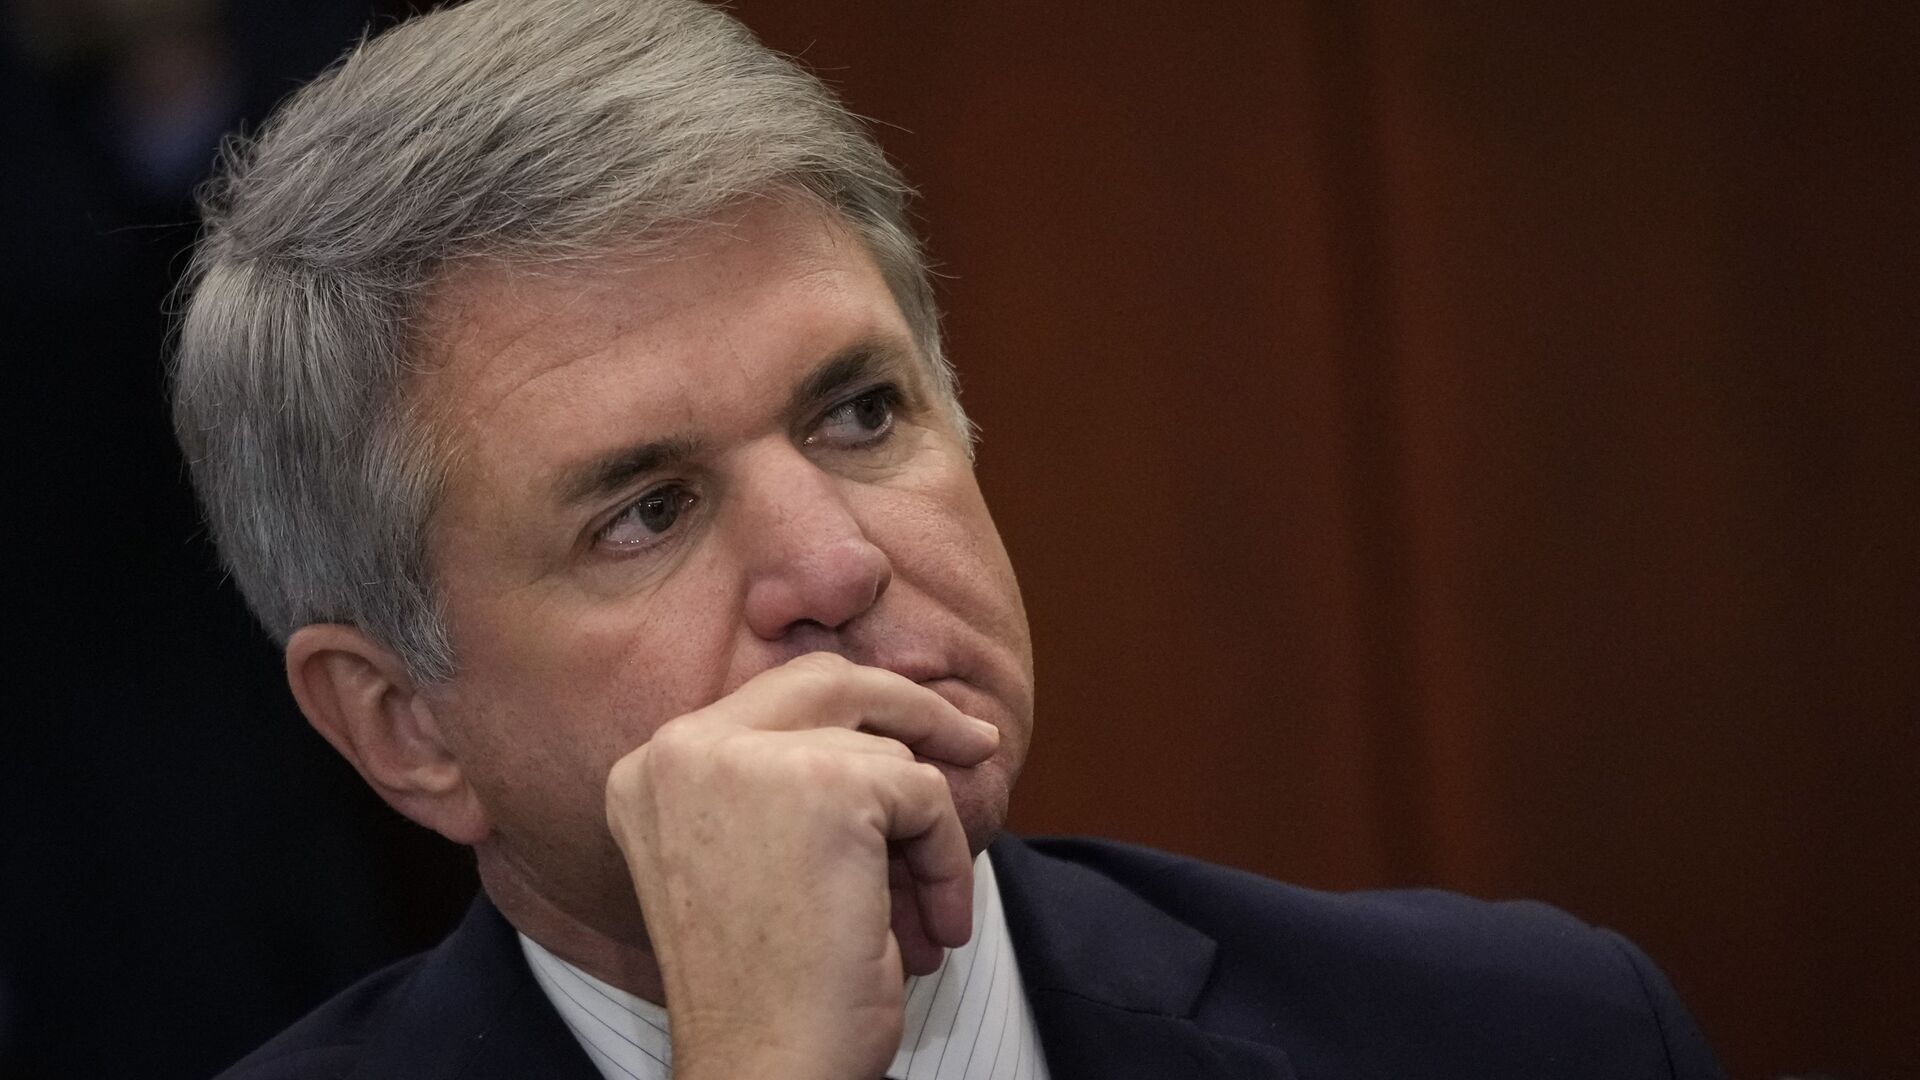 Rep. Michael McCaul (R-TX) listens to discussion about the American military withdrawal in Afghanistan, during a meeting with House Republicans, including those who served in the military, on August 30, 2021 in Washington, DC. - Sputnik International, 1920, 06.09.2021